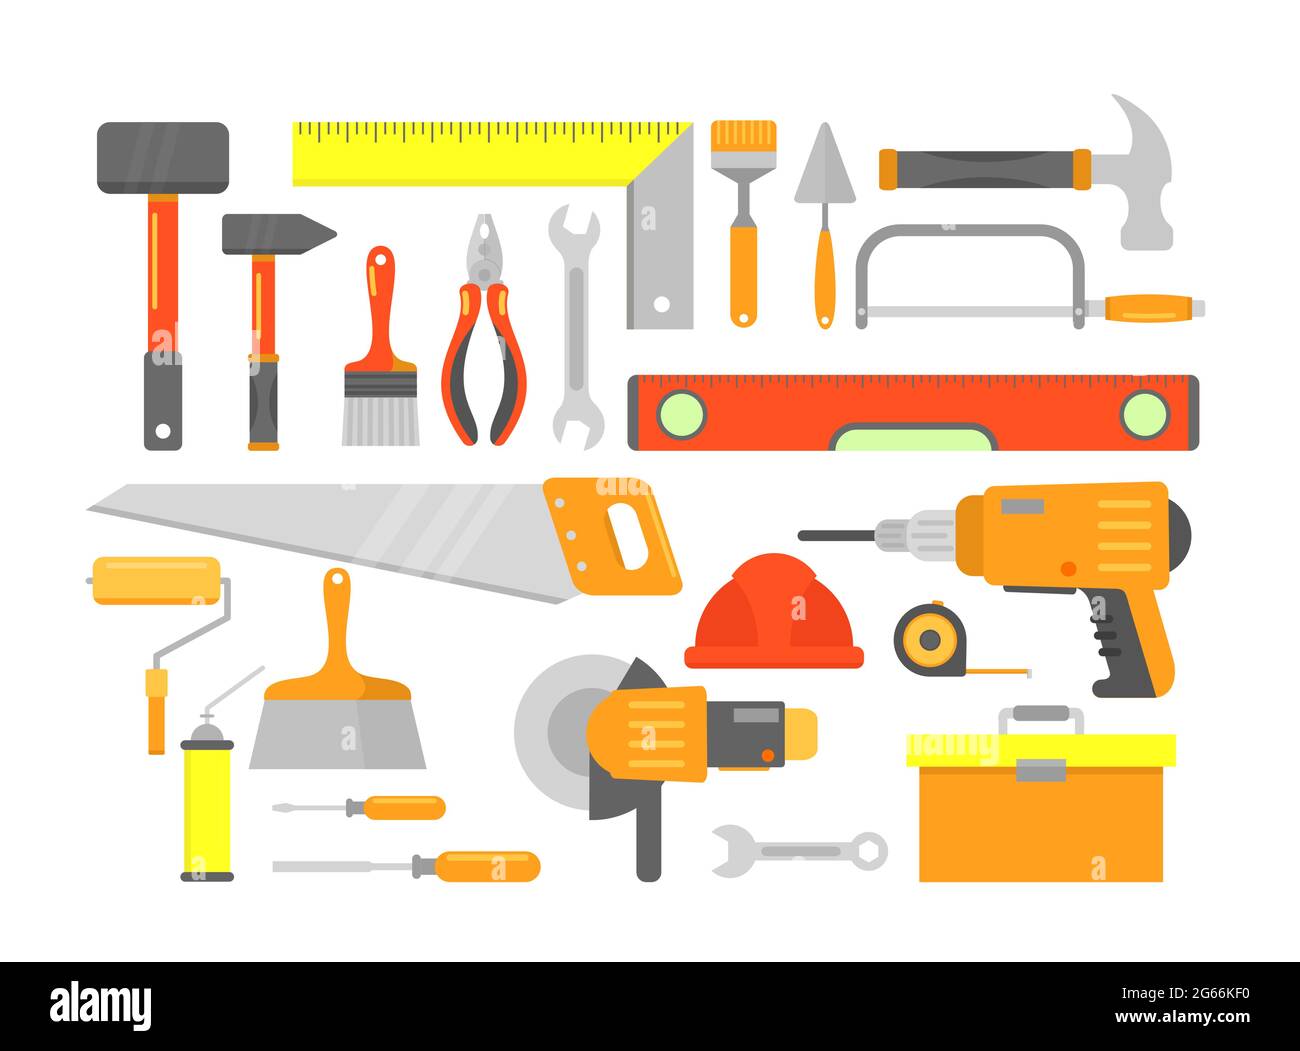 Vector illustration set of building tools and elements for building in bright colors isolated on white background in flat cartoon style. Stock Vector